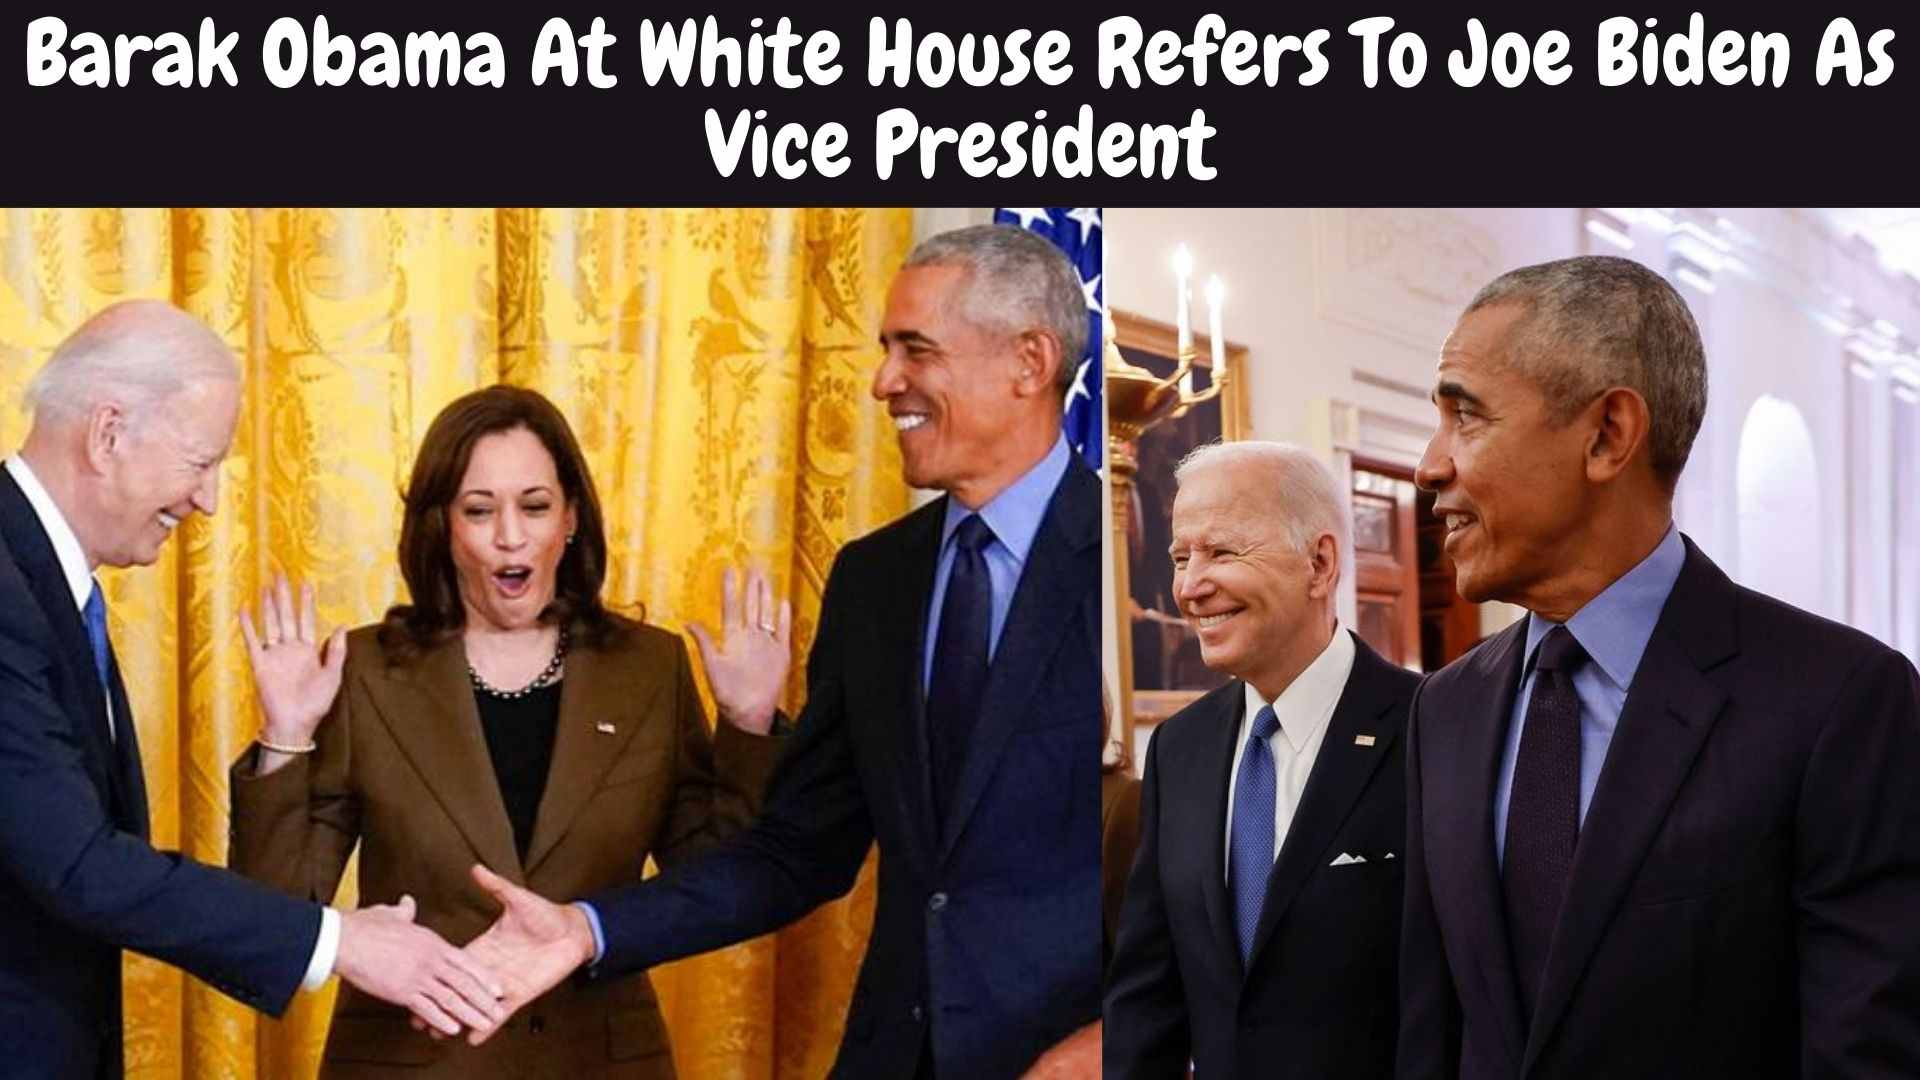 Barak Obama At White House Refers To Joe Biden As Vice President Wallpaper and images